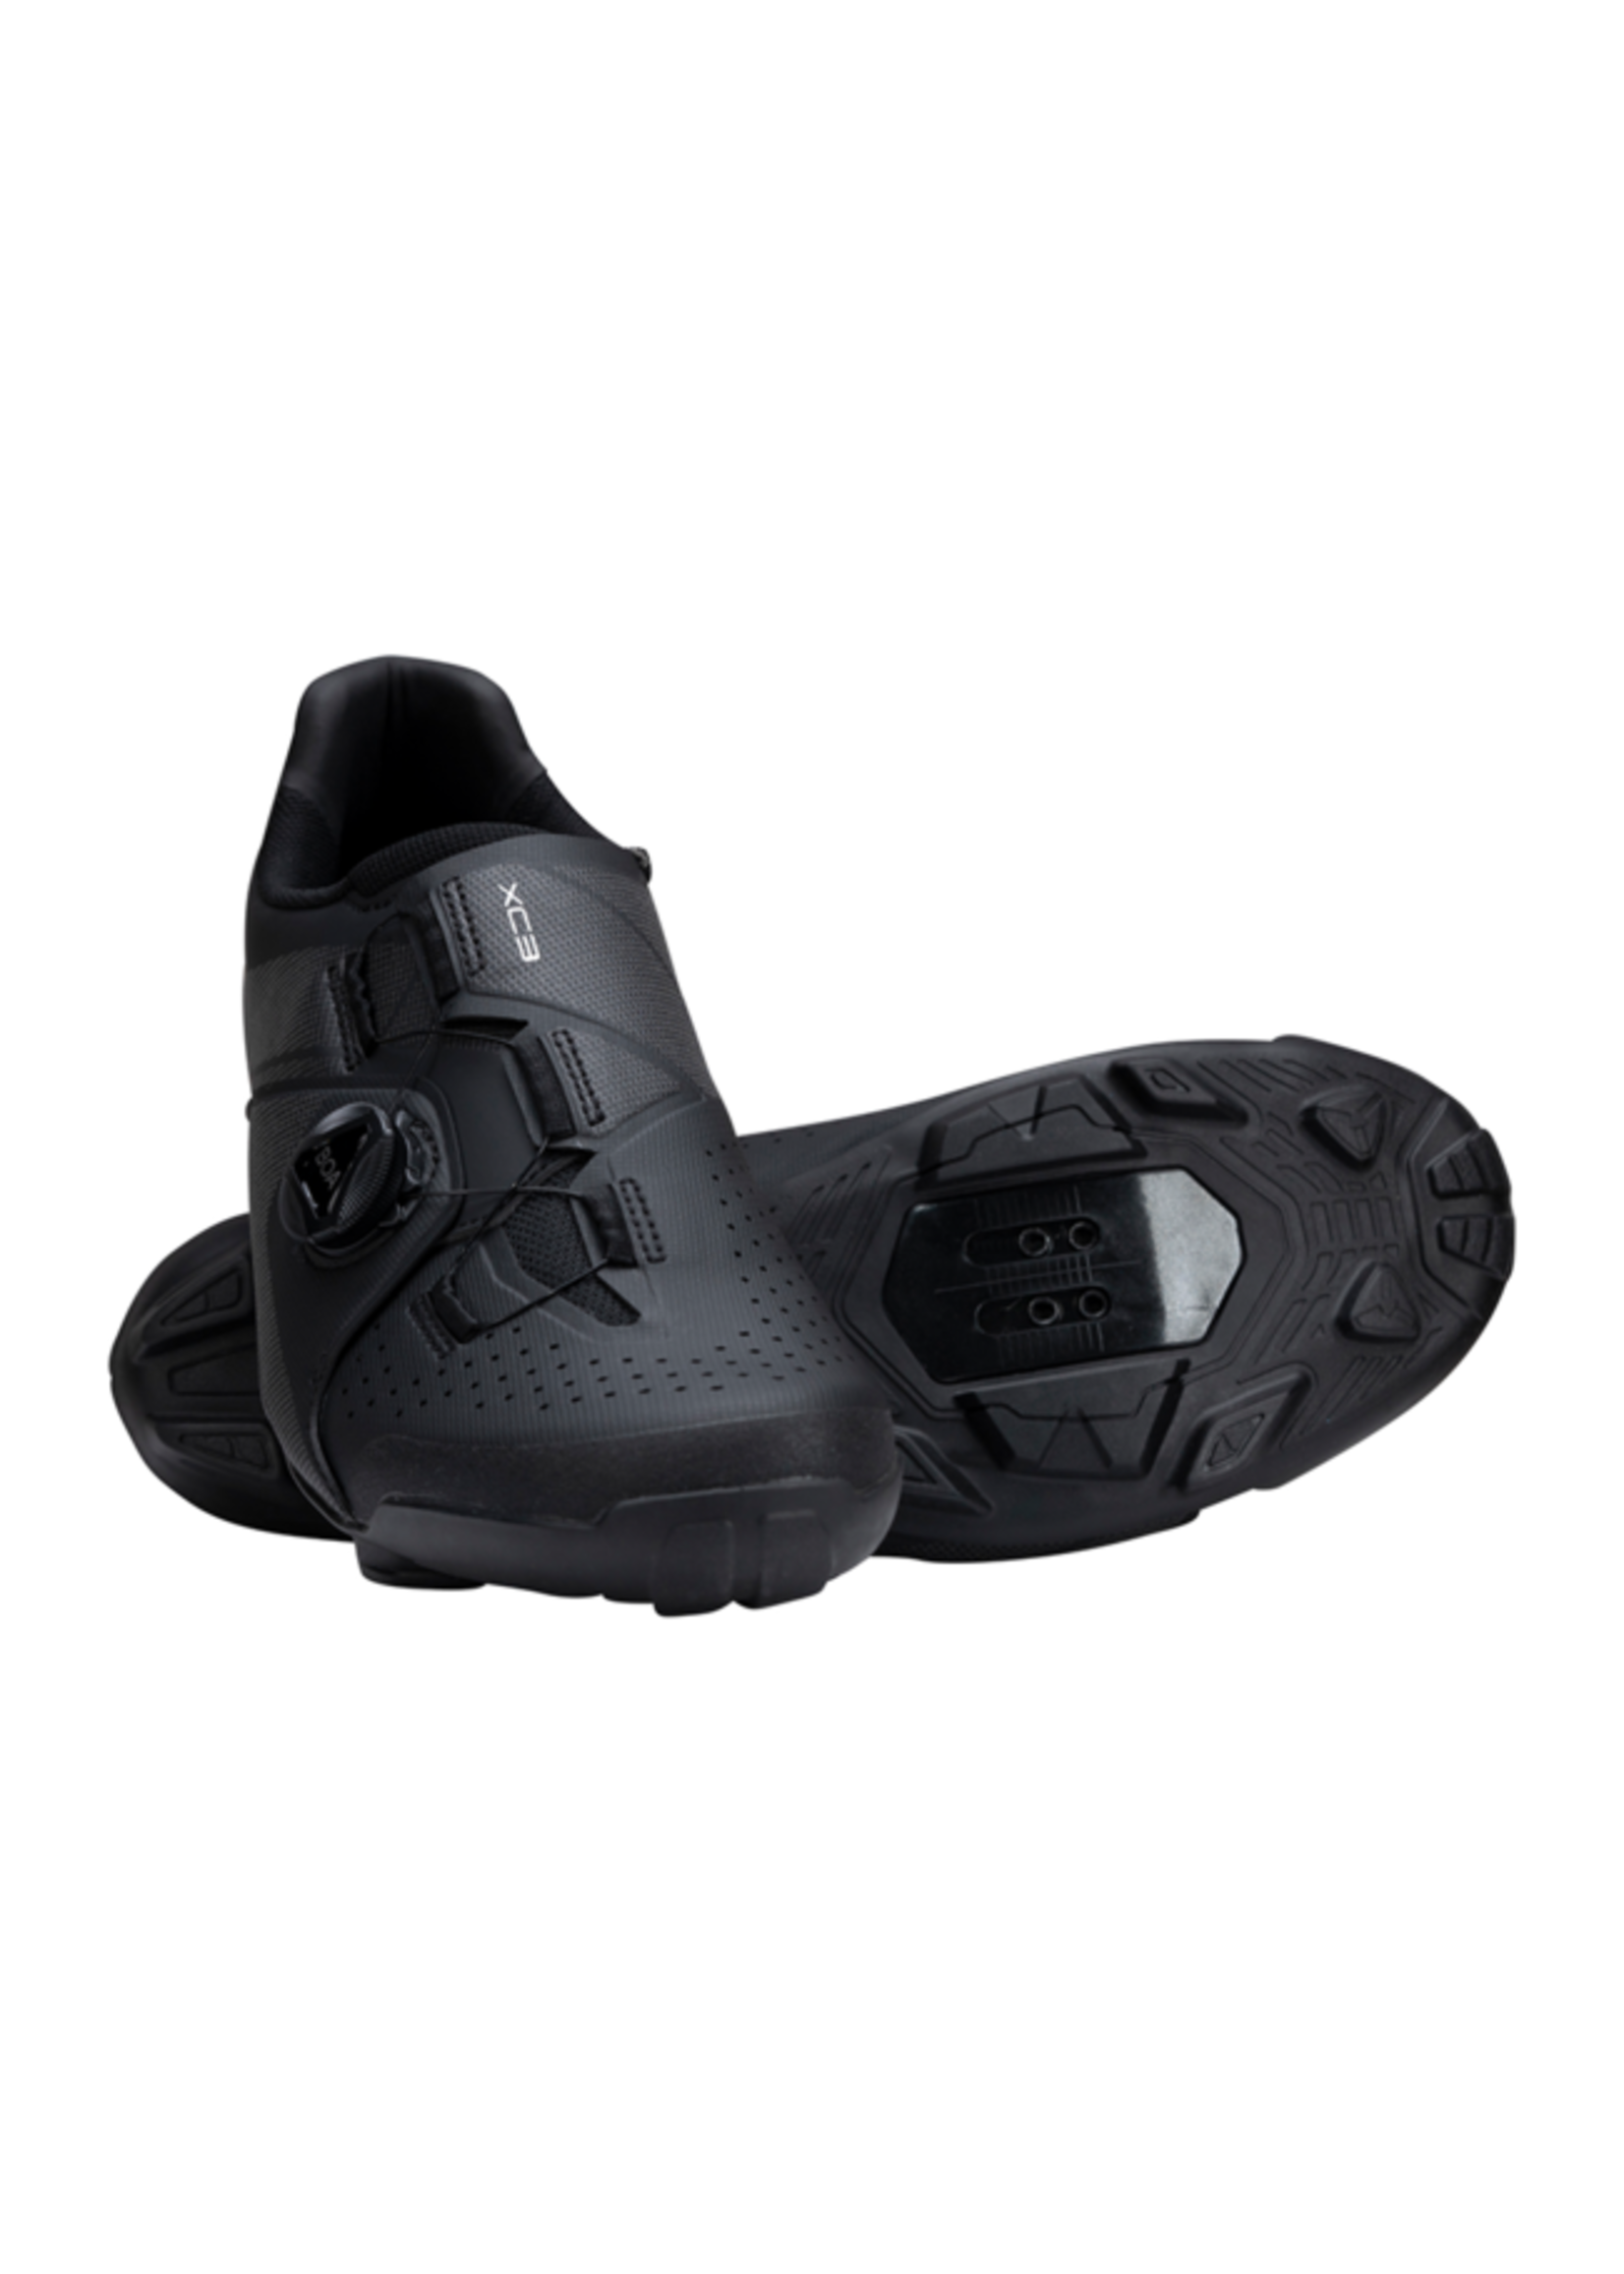 Shimano SH-XC300 BICYCLE SHOES  BLK 42.0 WIDE